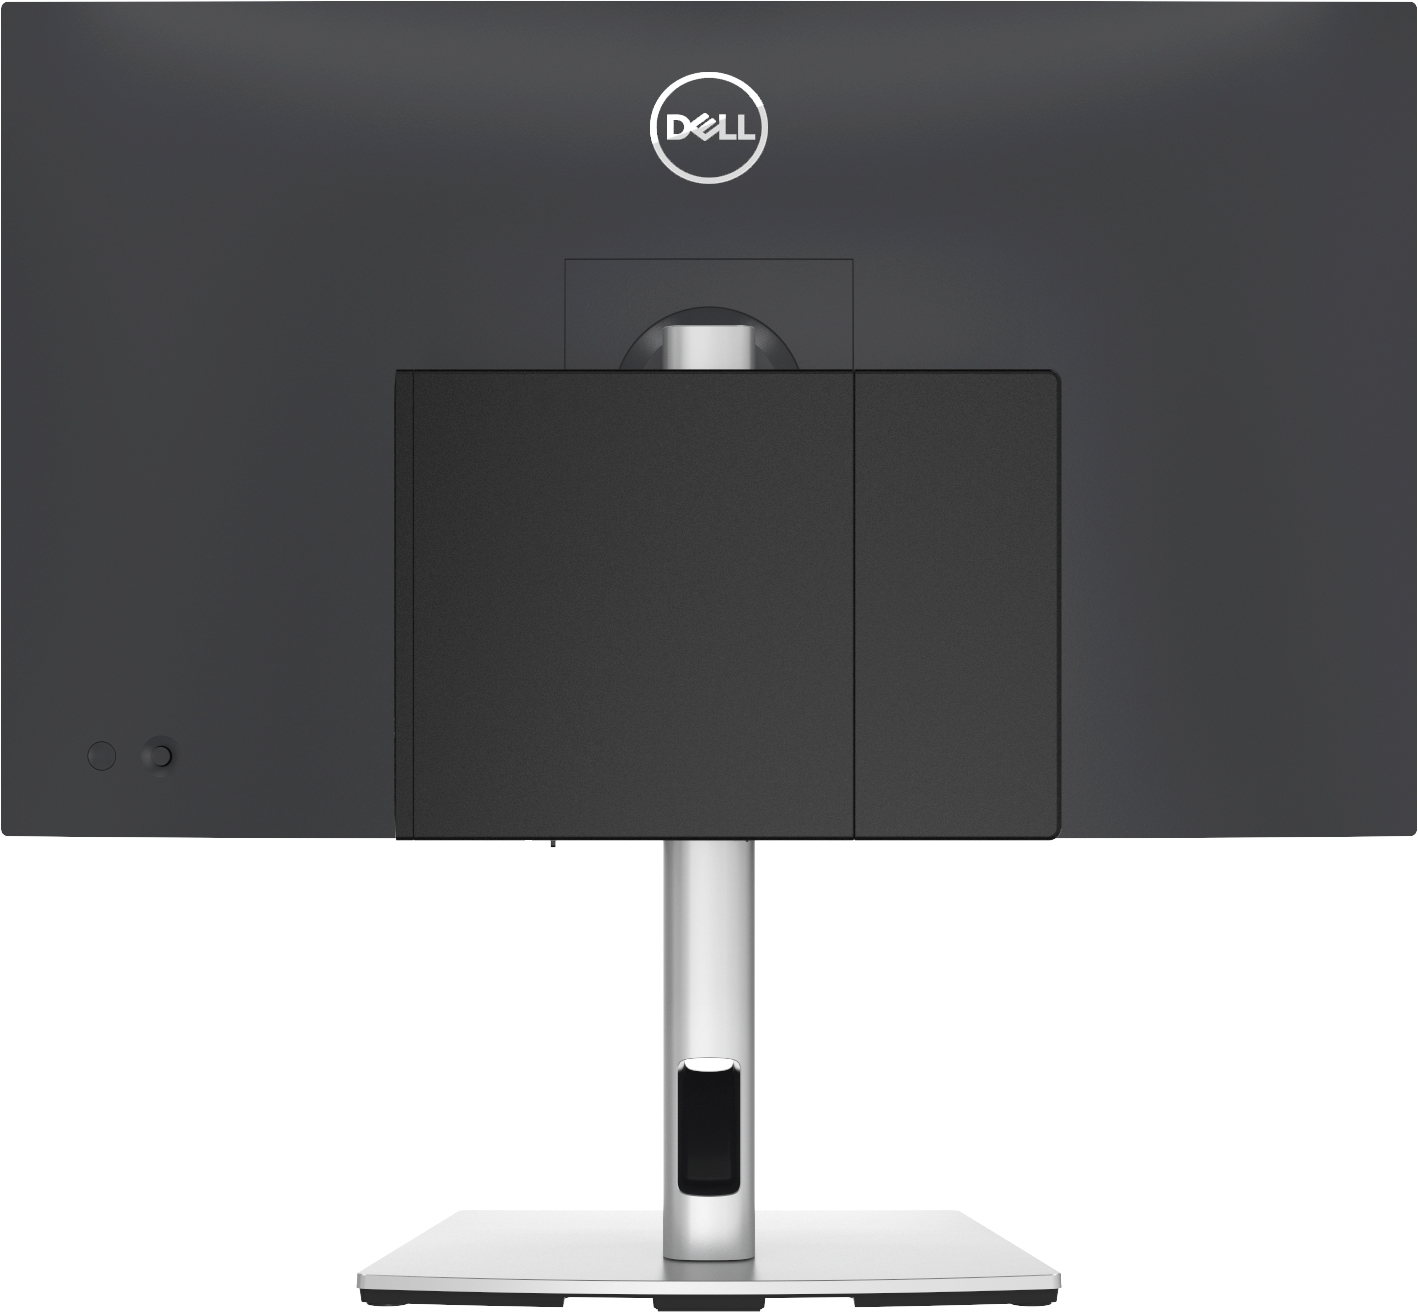 Dell Micro Form Factor All-in-One Stand - MFS22NO backward compatible